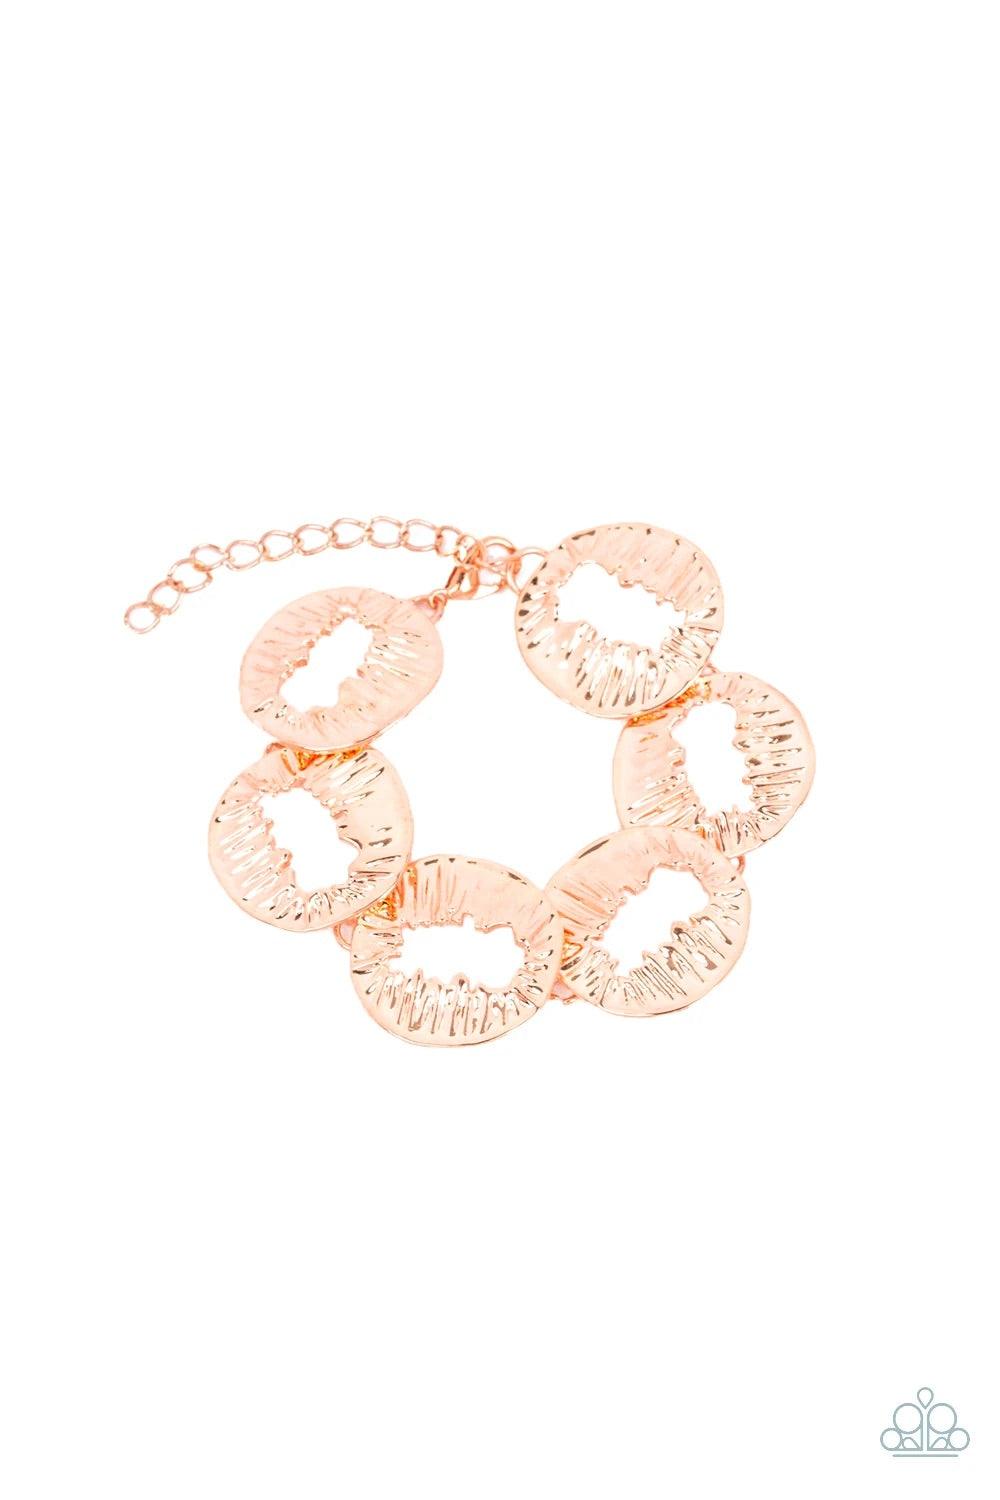 Paparazzi Accessories Cut It Out - Copper Featuring asymmetrical cutout centers, textured shiny copper discs connect across the wrist for an abstract look. Features an adjustable clasp closure. Sold as one individual bracelet. Jewelry